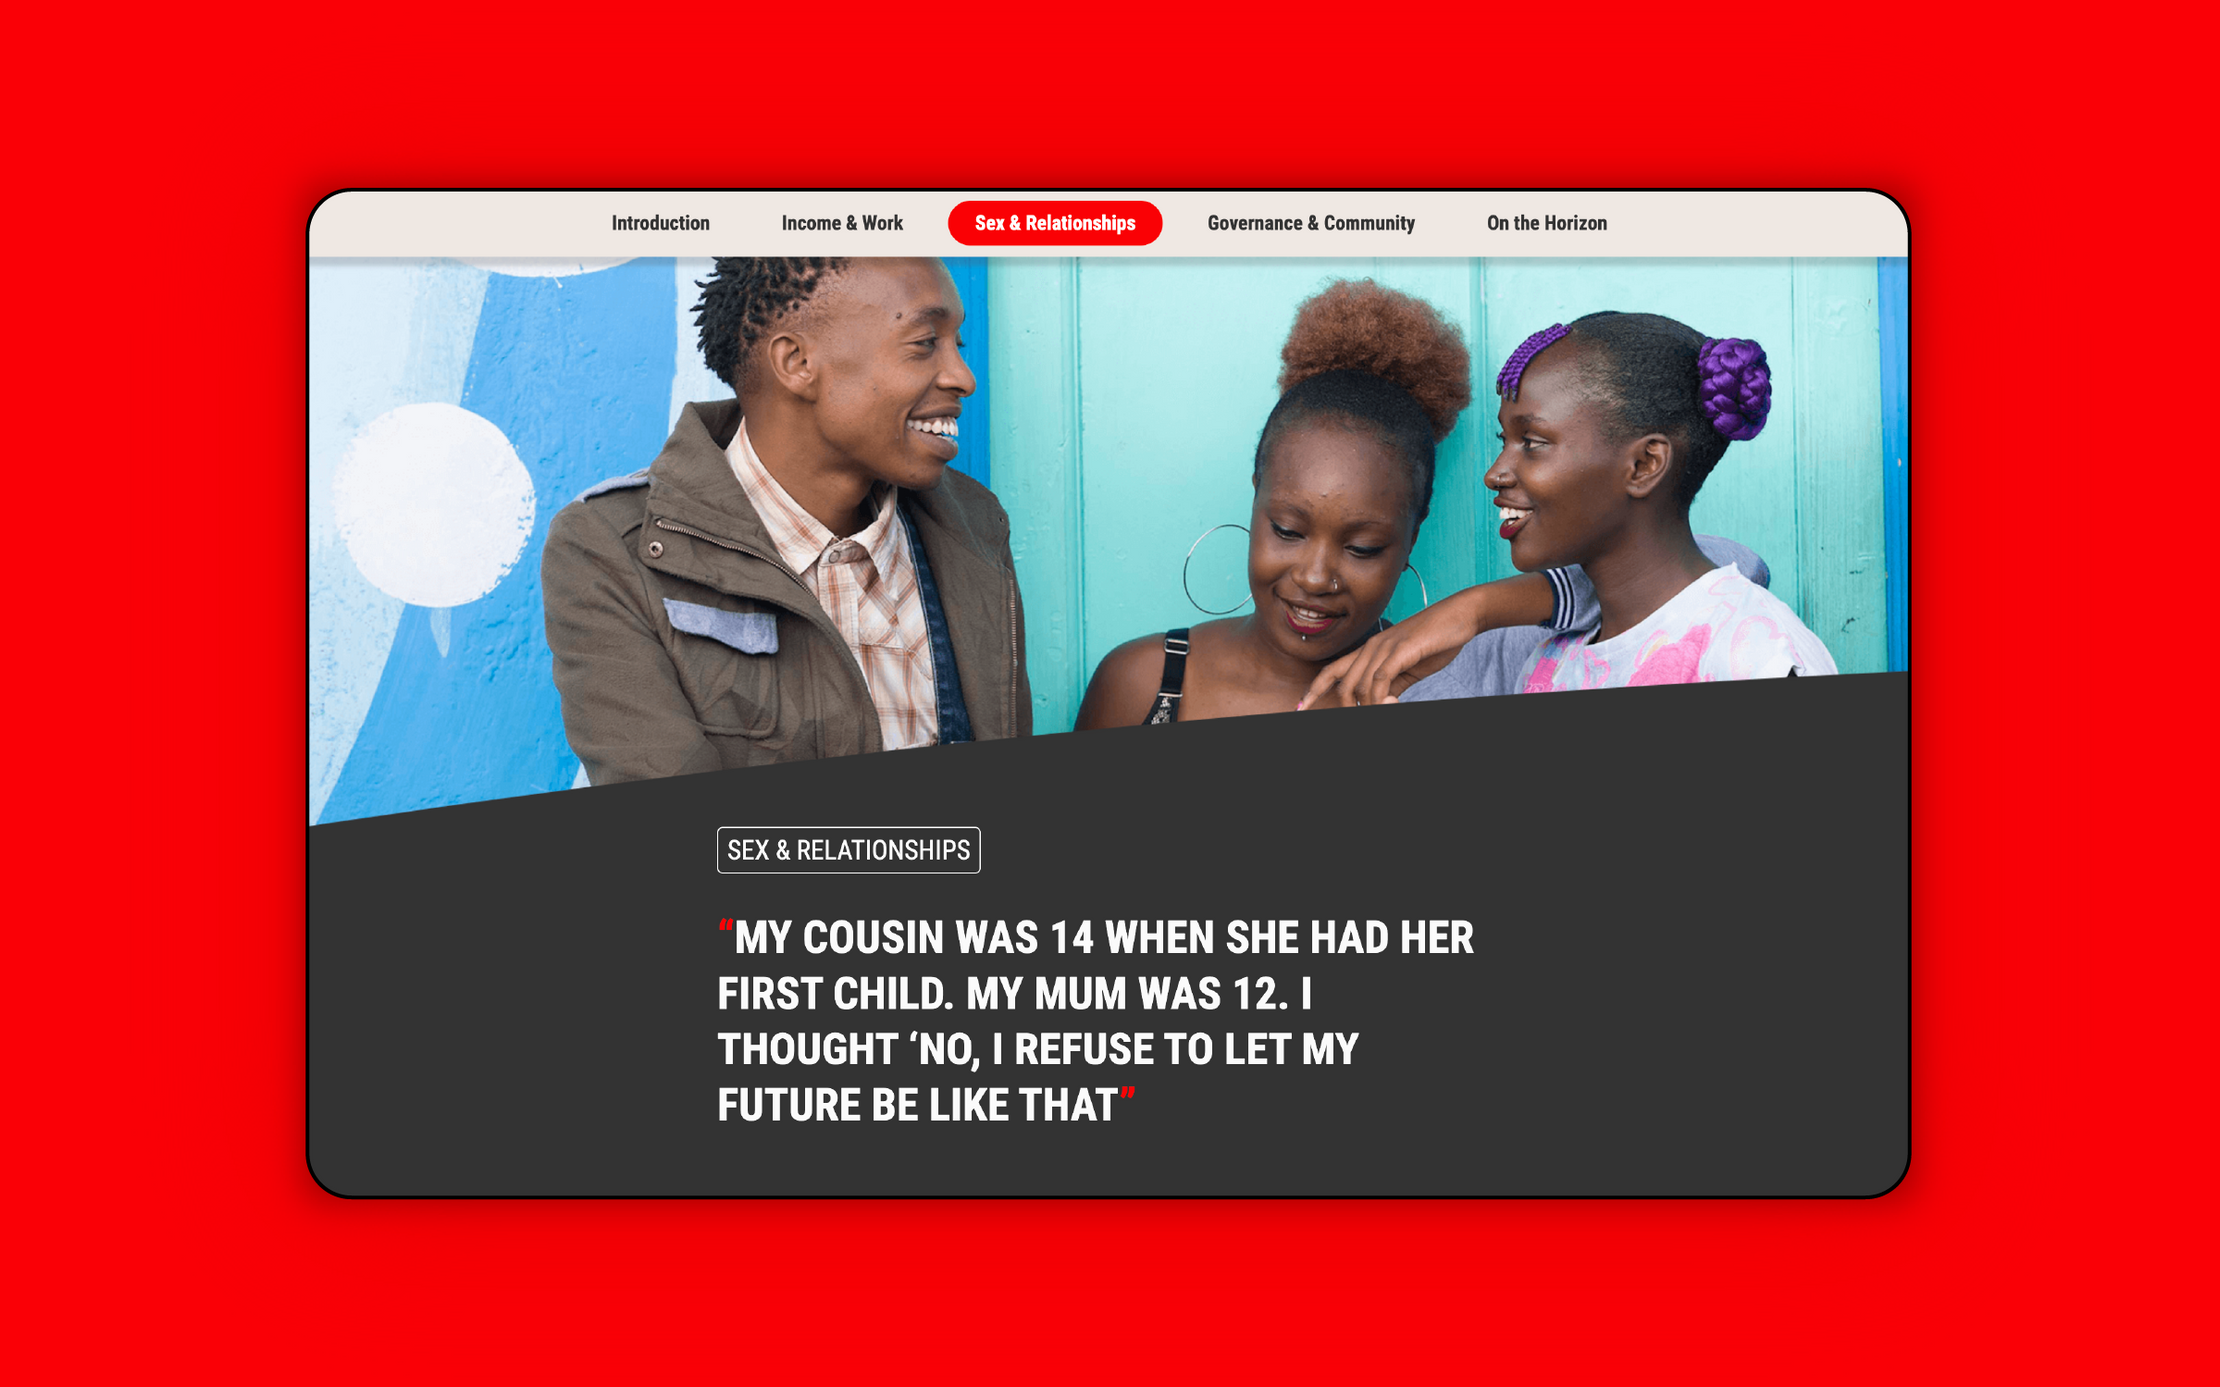 A screenshot from the generation who can trasnform Kenya story. It includes a photo of three young Kenyan's talking above a block quote that reads: 'My cousin was 14 when she had her first child. My mum was 12. I thought 'No, I refuse to let my future be like that'.'